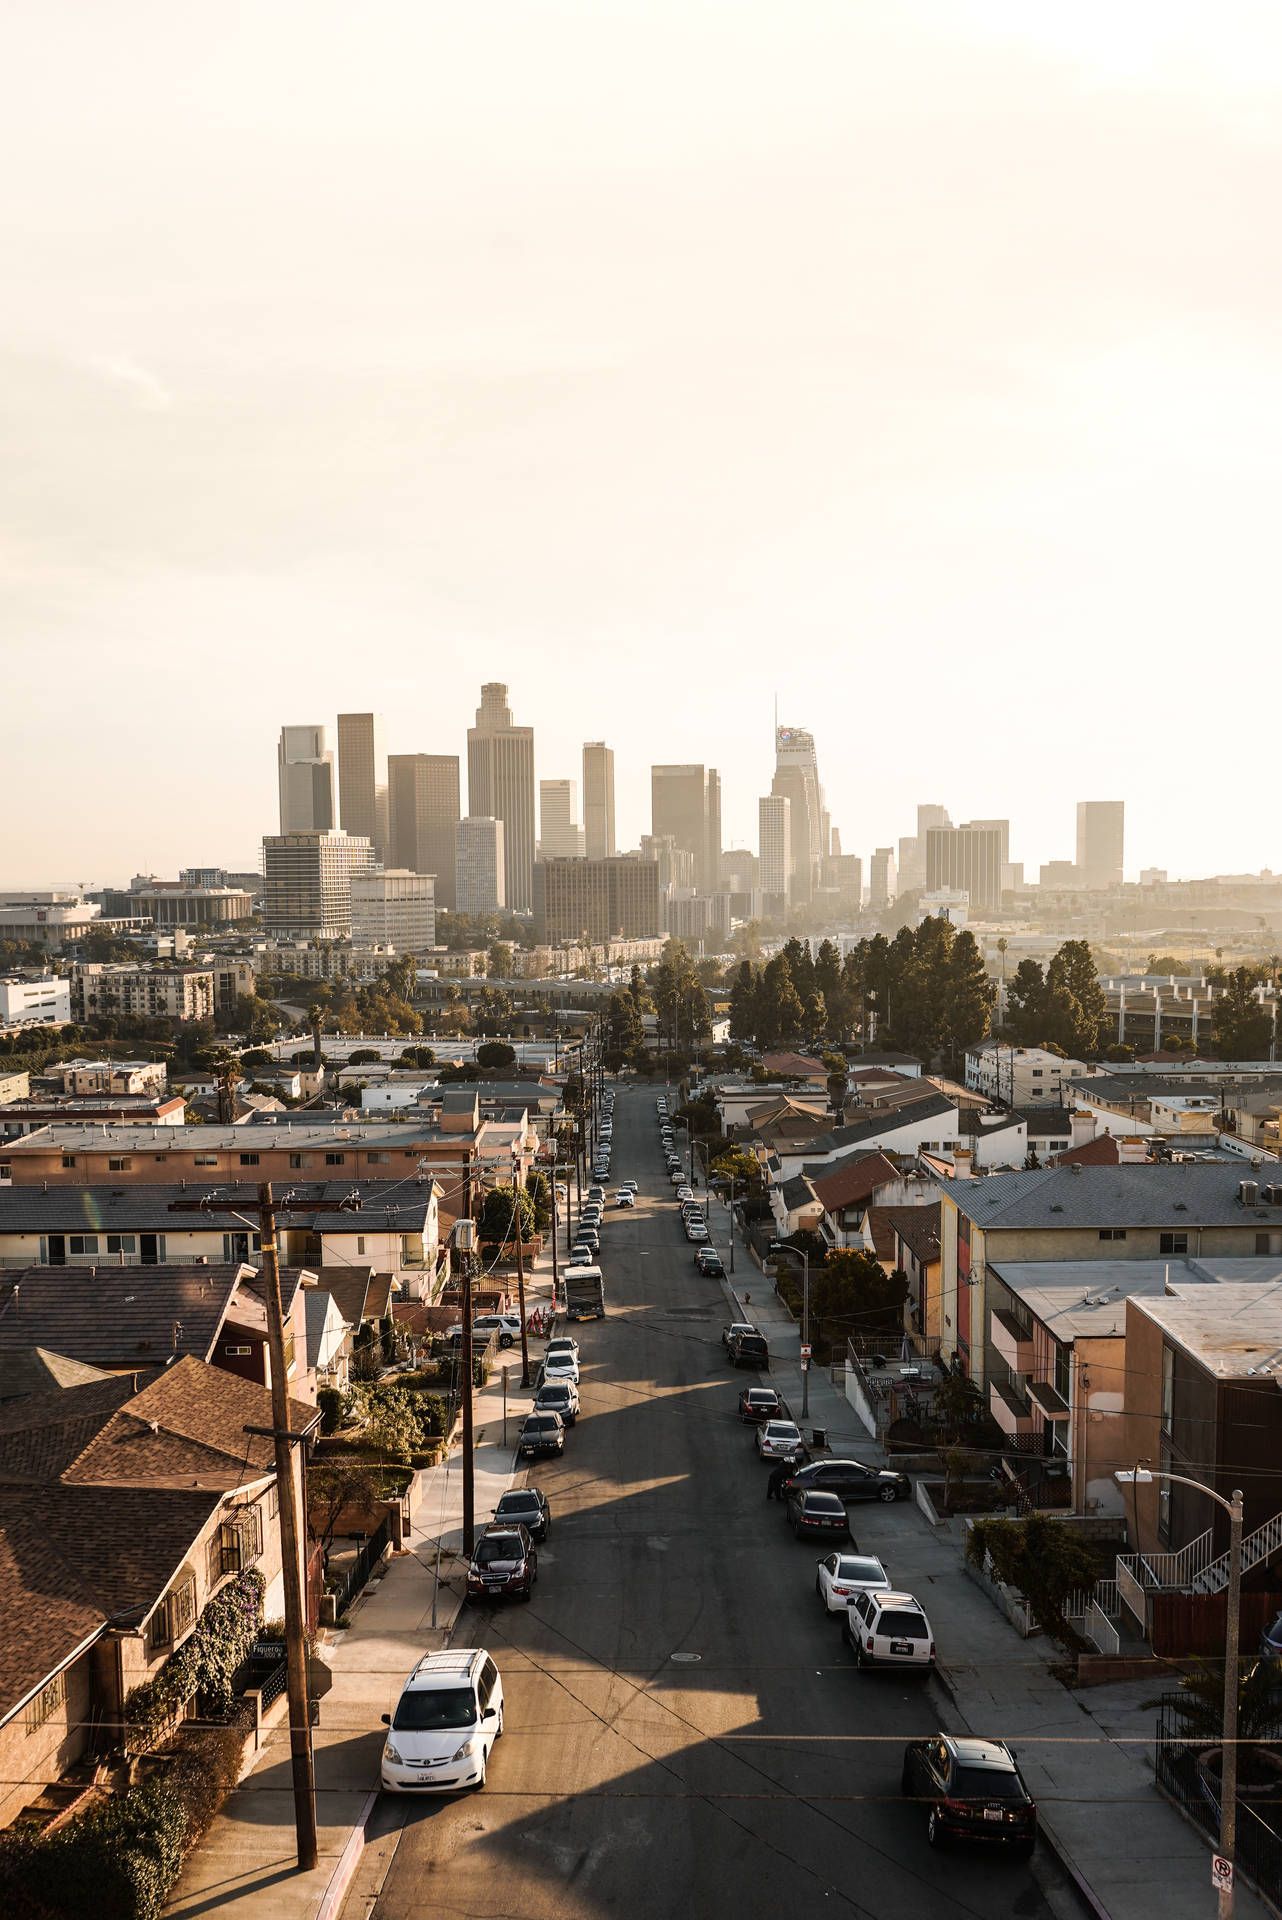 A view of the downtown Los Angeles skyline from a residential neighborhood. - Los Angeles